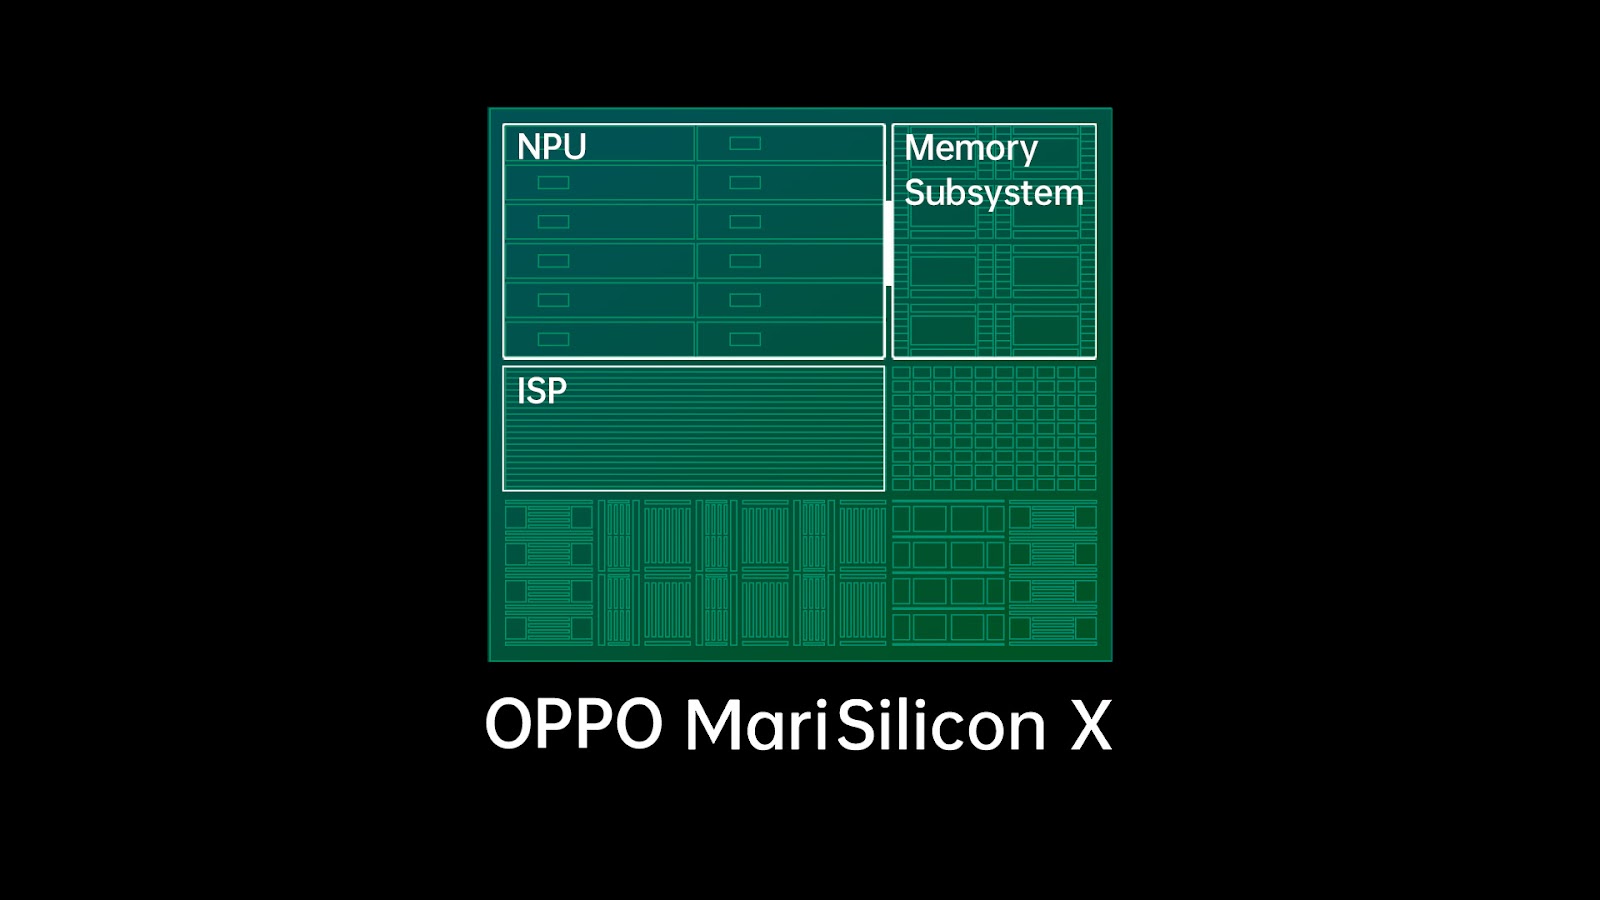 2. Built on 6nm process technology, MariSilicon X combines an advanced NPU, ISP, and multi-tier memory architecture.jpg